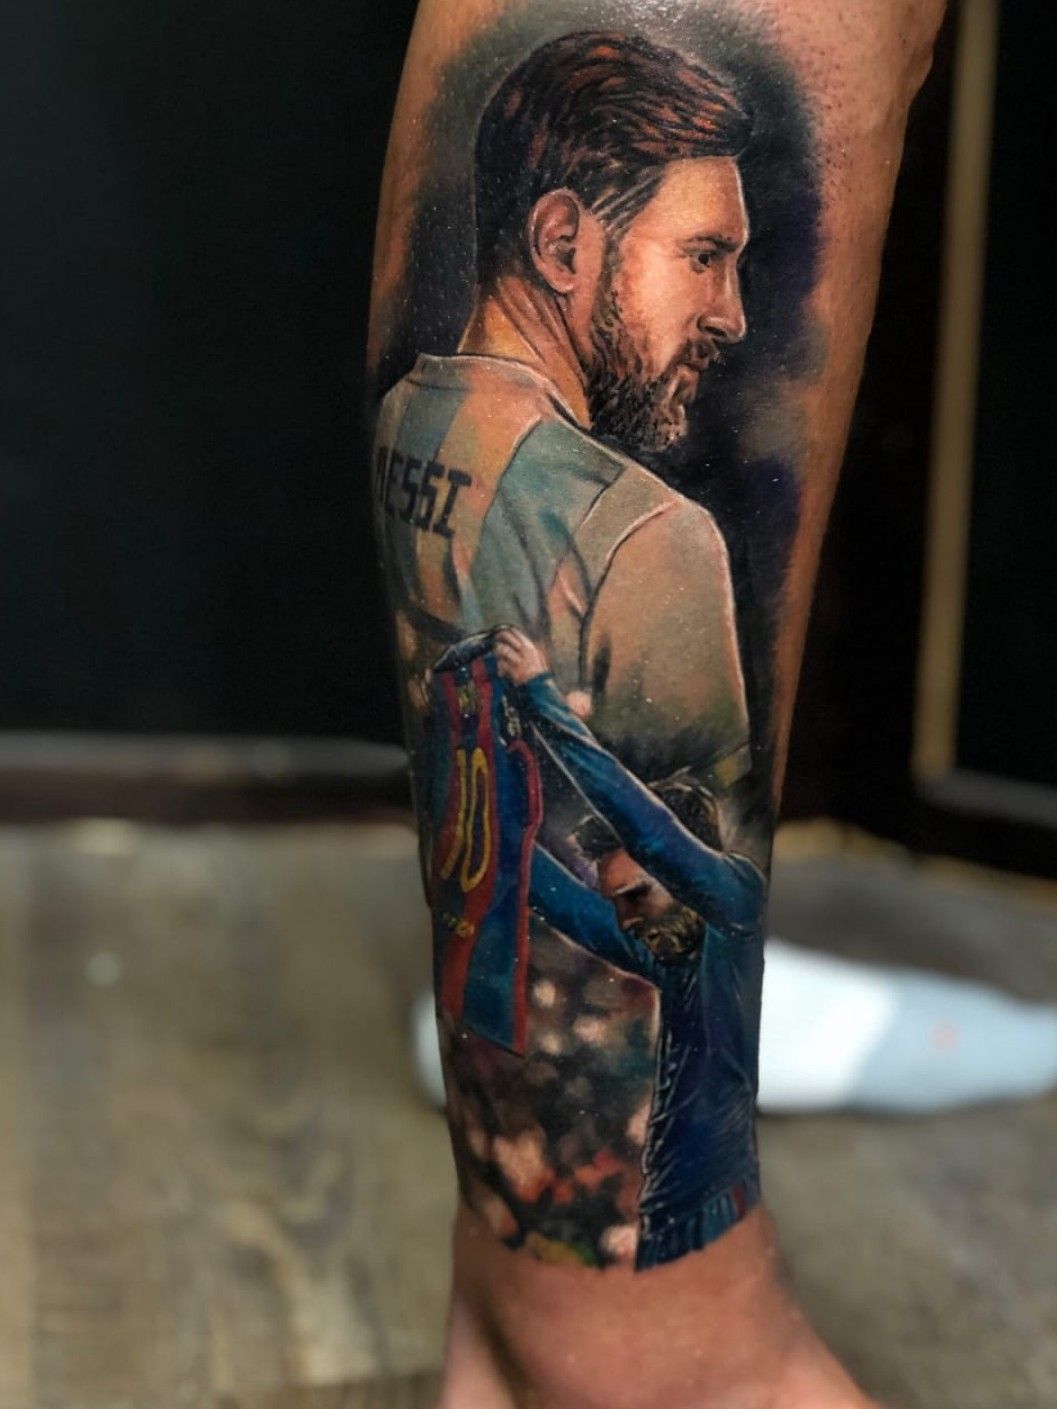 Check out Lionel Messi Tattoos and their significance in his life